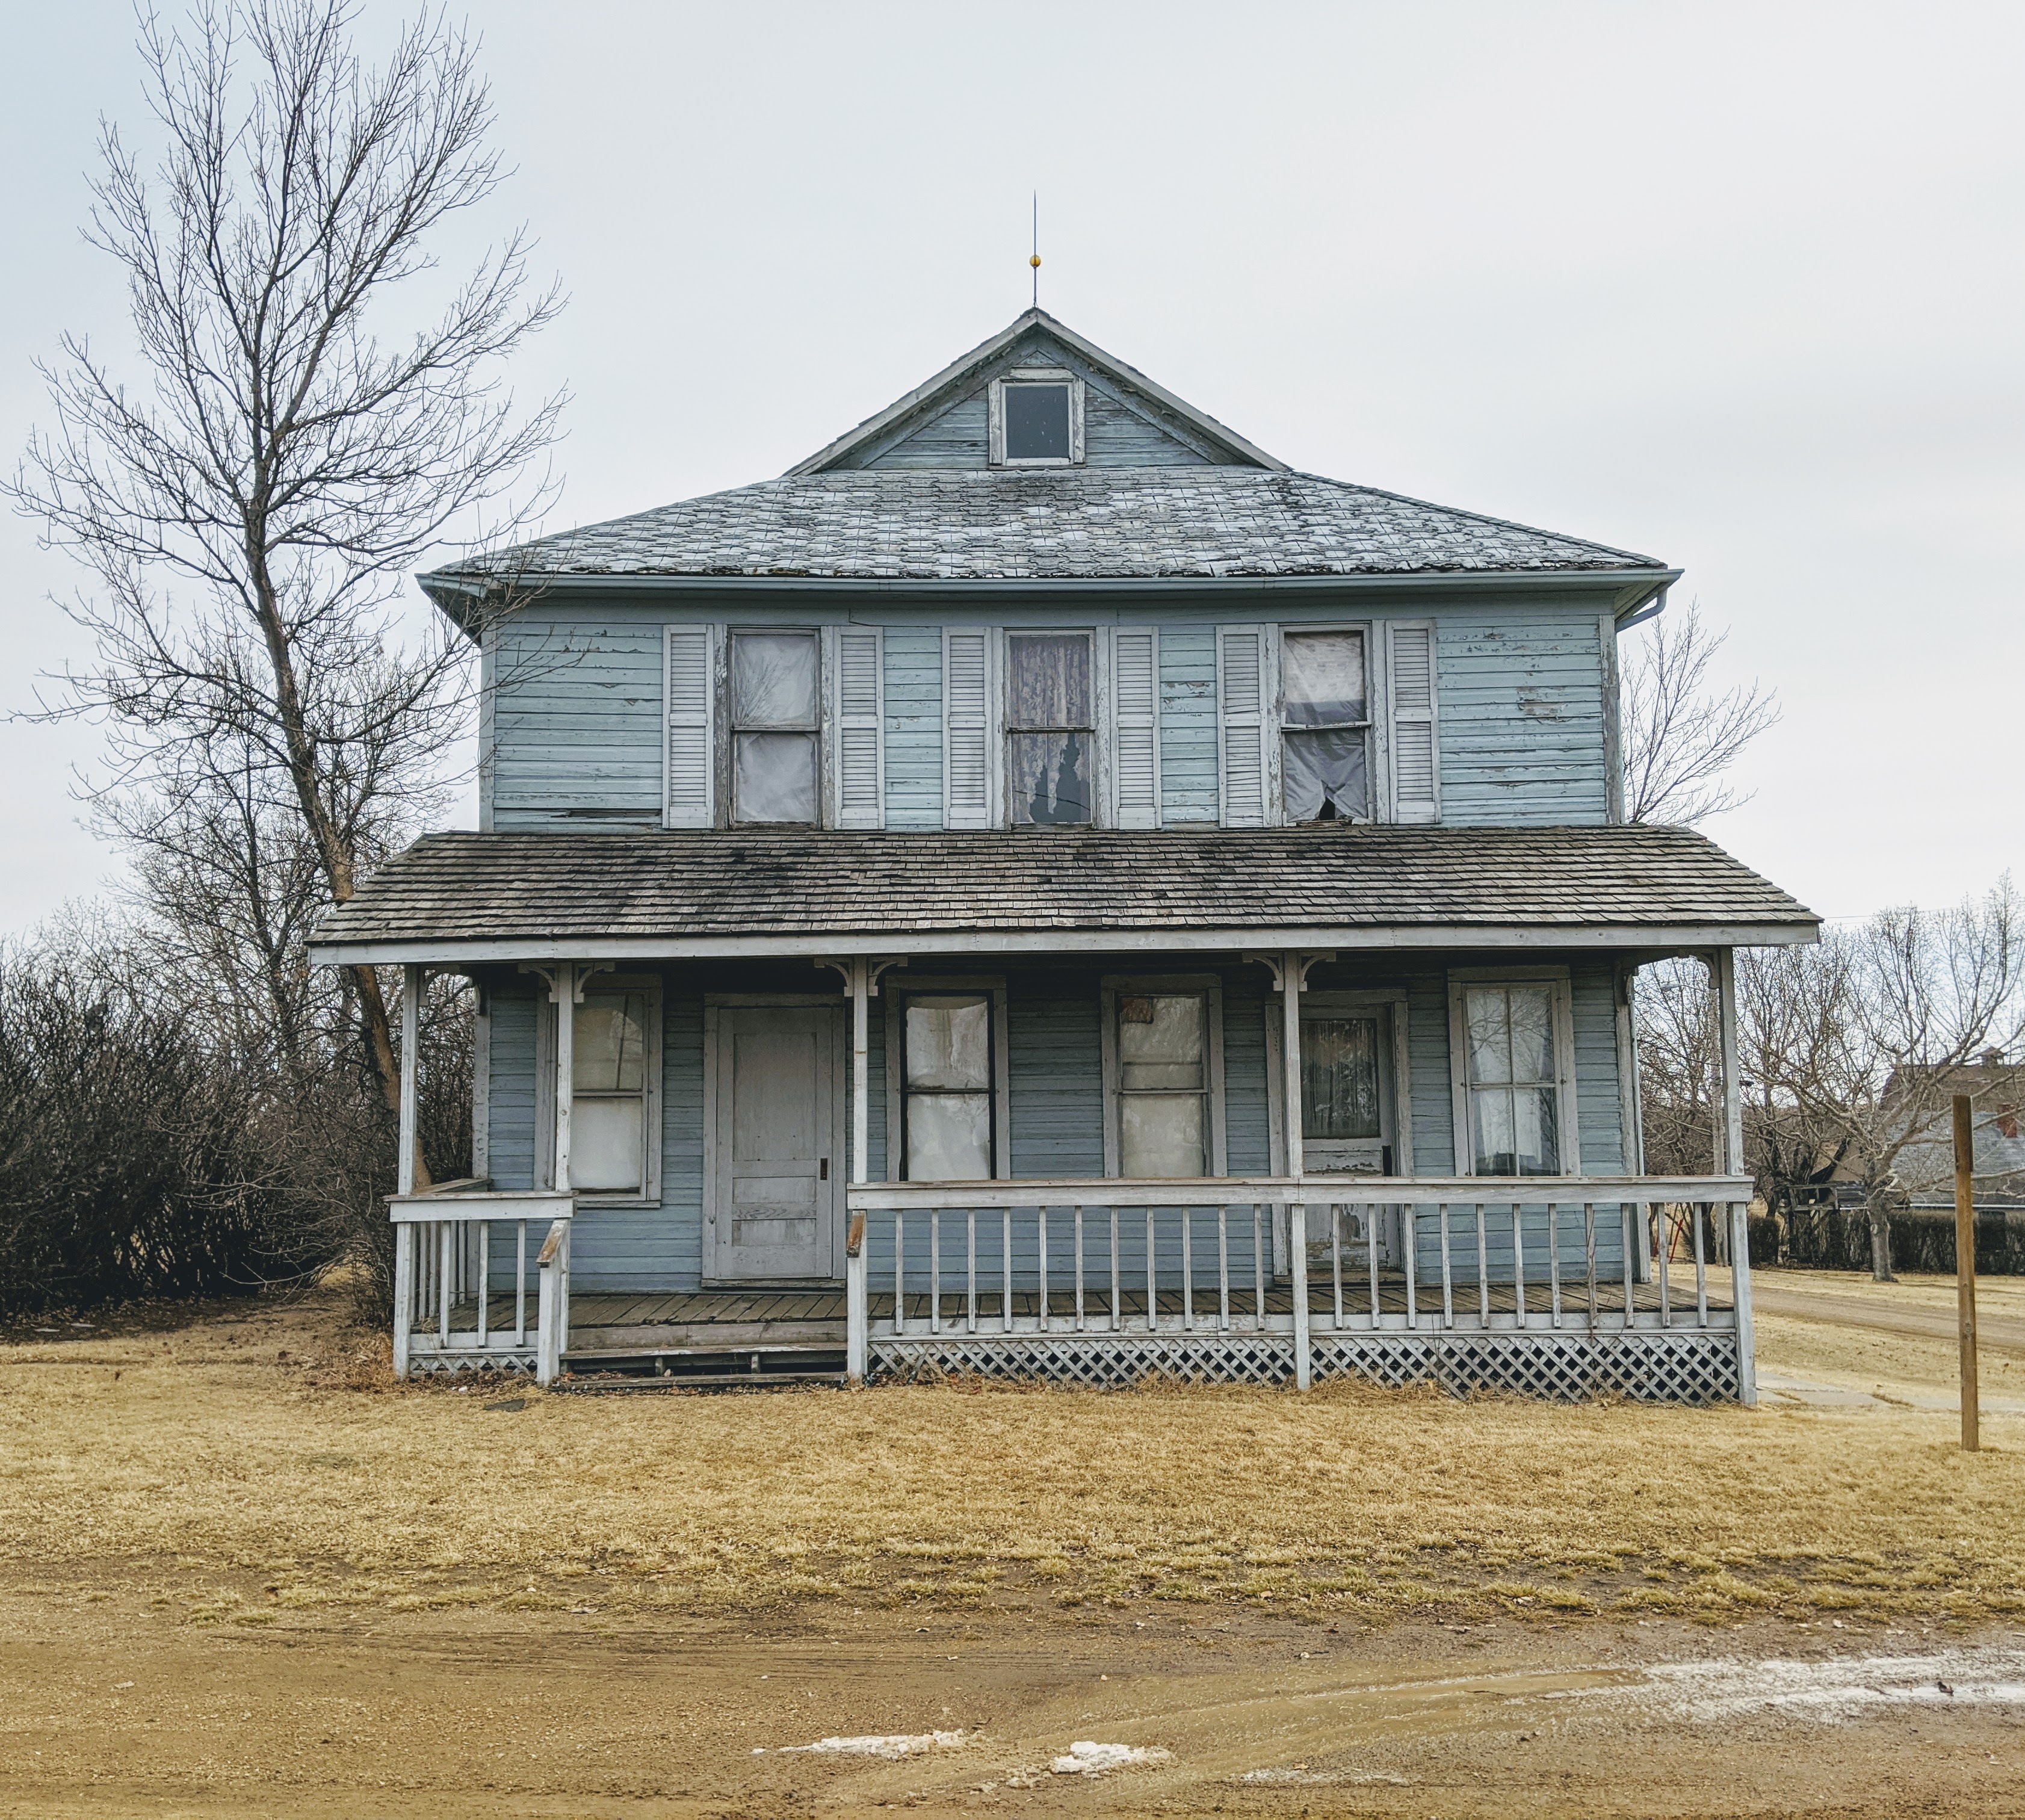 an abandoned house with faded and chipped blue paint with a white porch